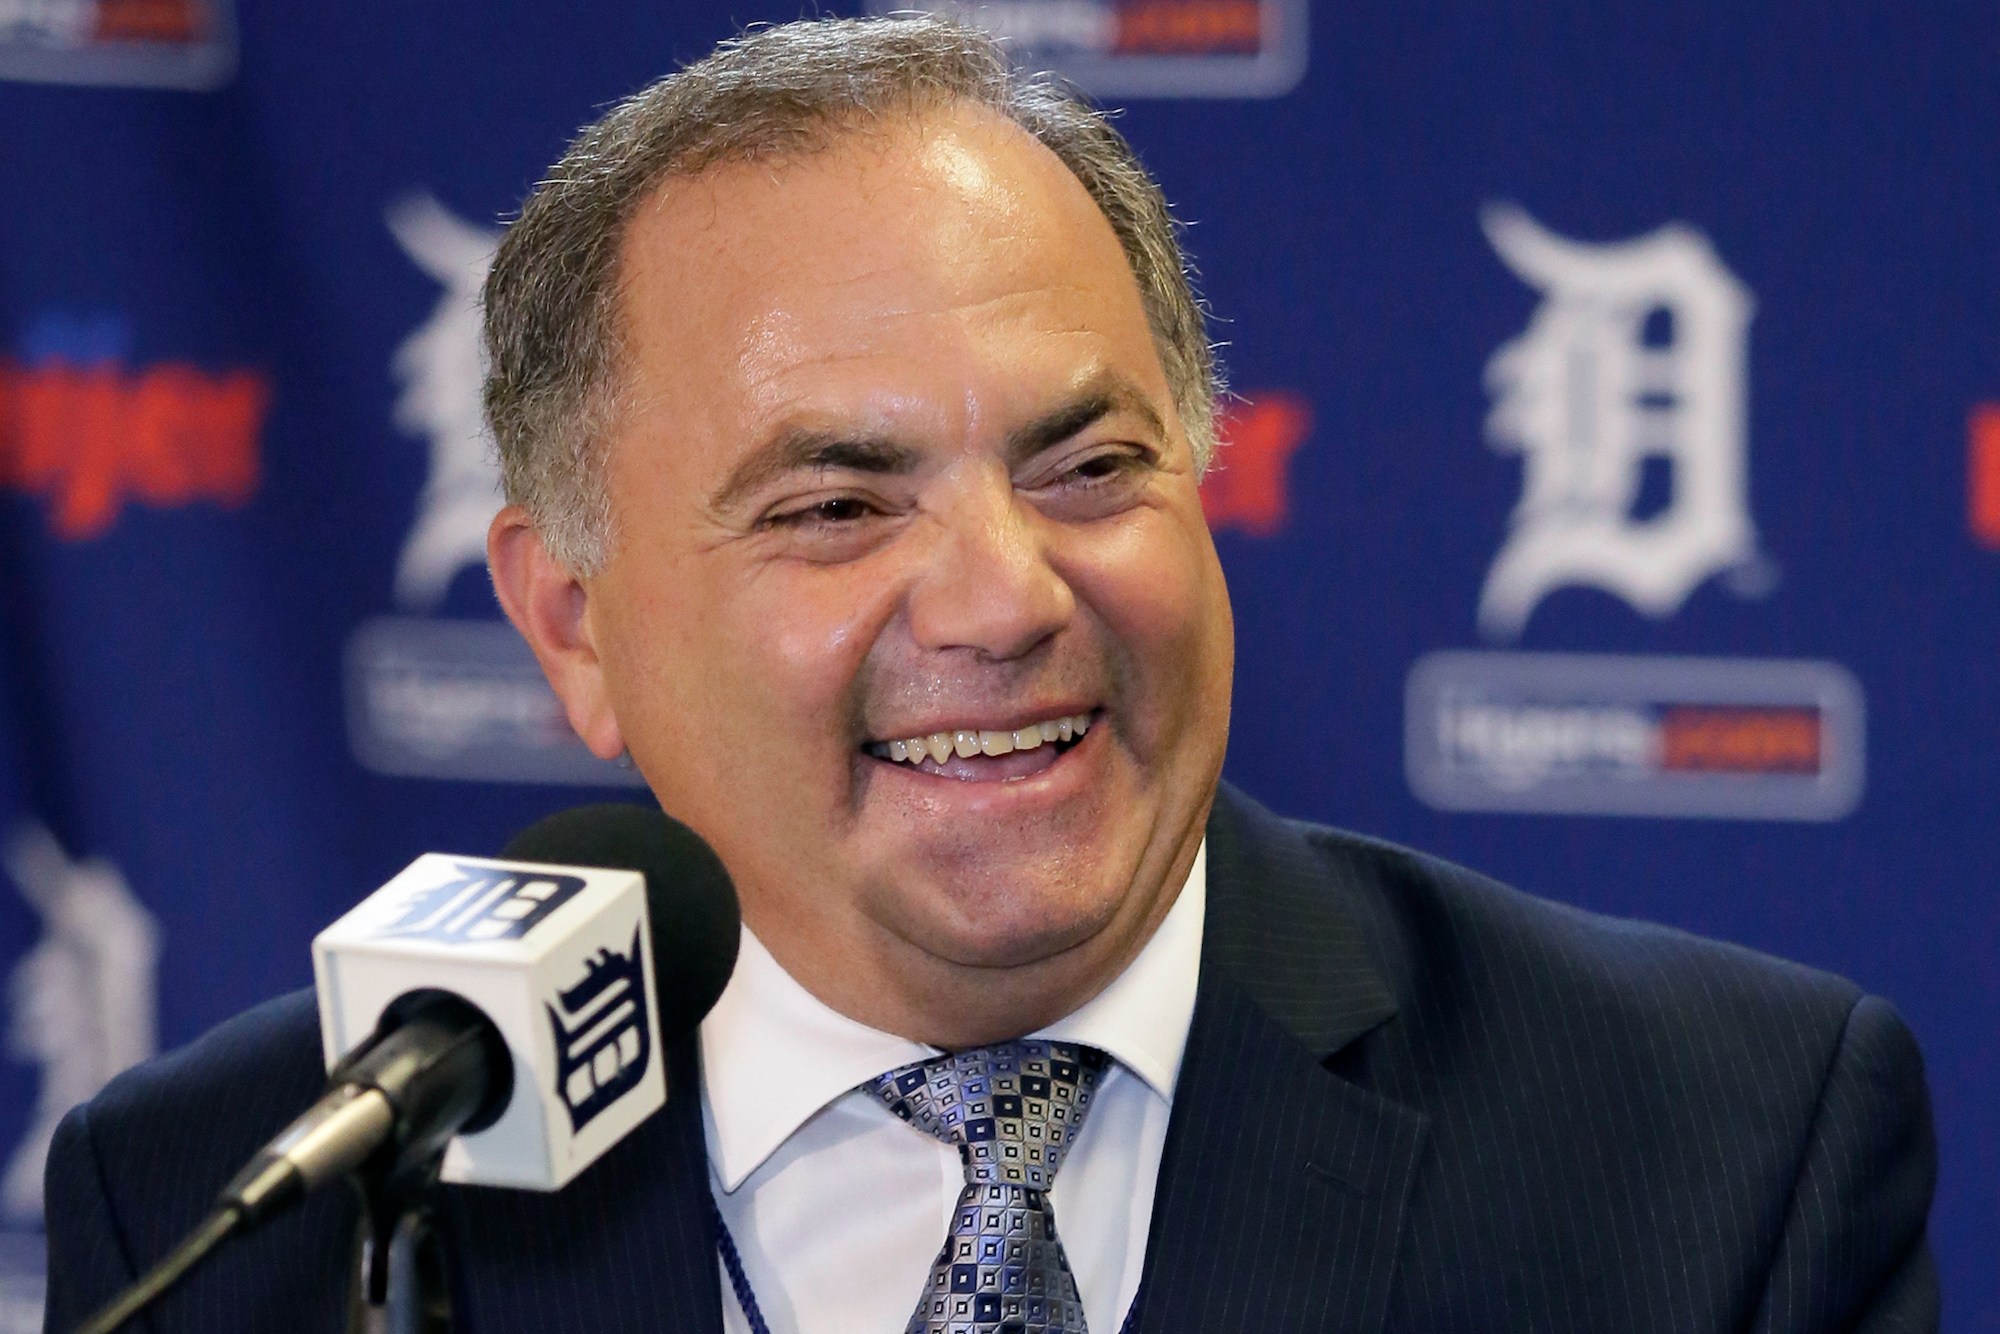 DETROIT, MI - AUGUST 4: Al Avila laughs during a news conference at Comerica Park after he was promoted to executive vice president of baseball operations and general manager on August 4, 2015 in Detroit, Michigan. Avila replaces Dave Dombrowski who was the Tigers' general manager since 2002. (Photo by Duane Burleson/Getty Images)